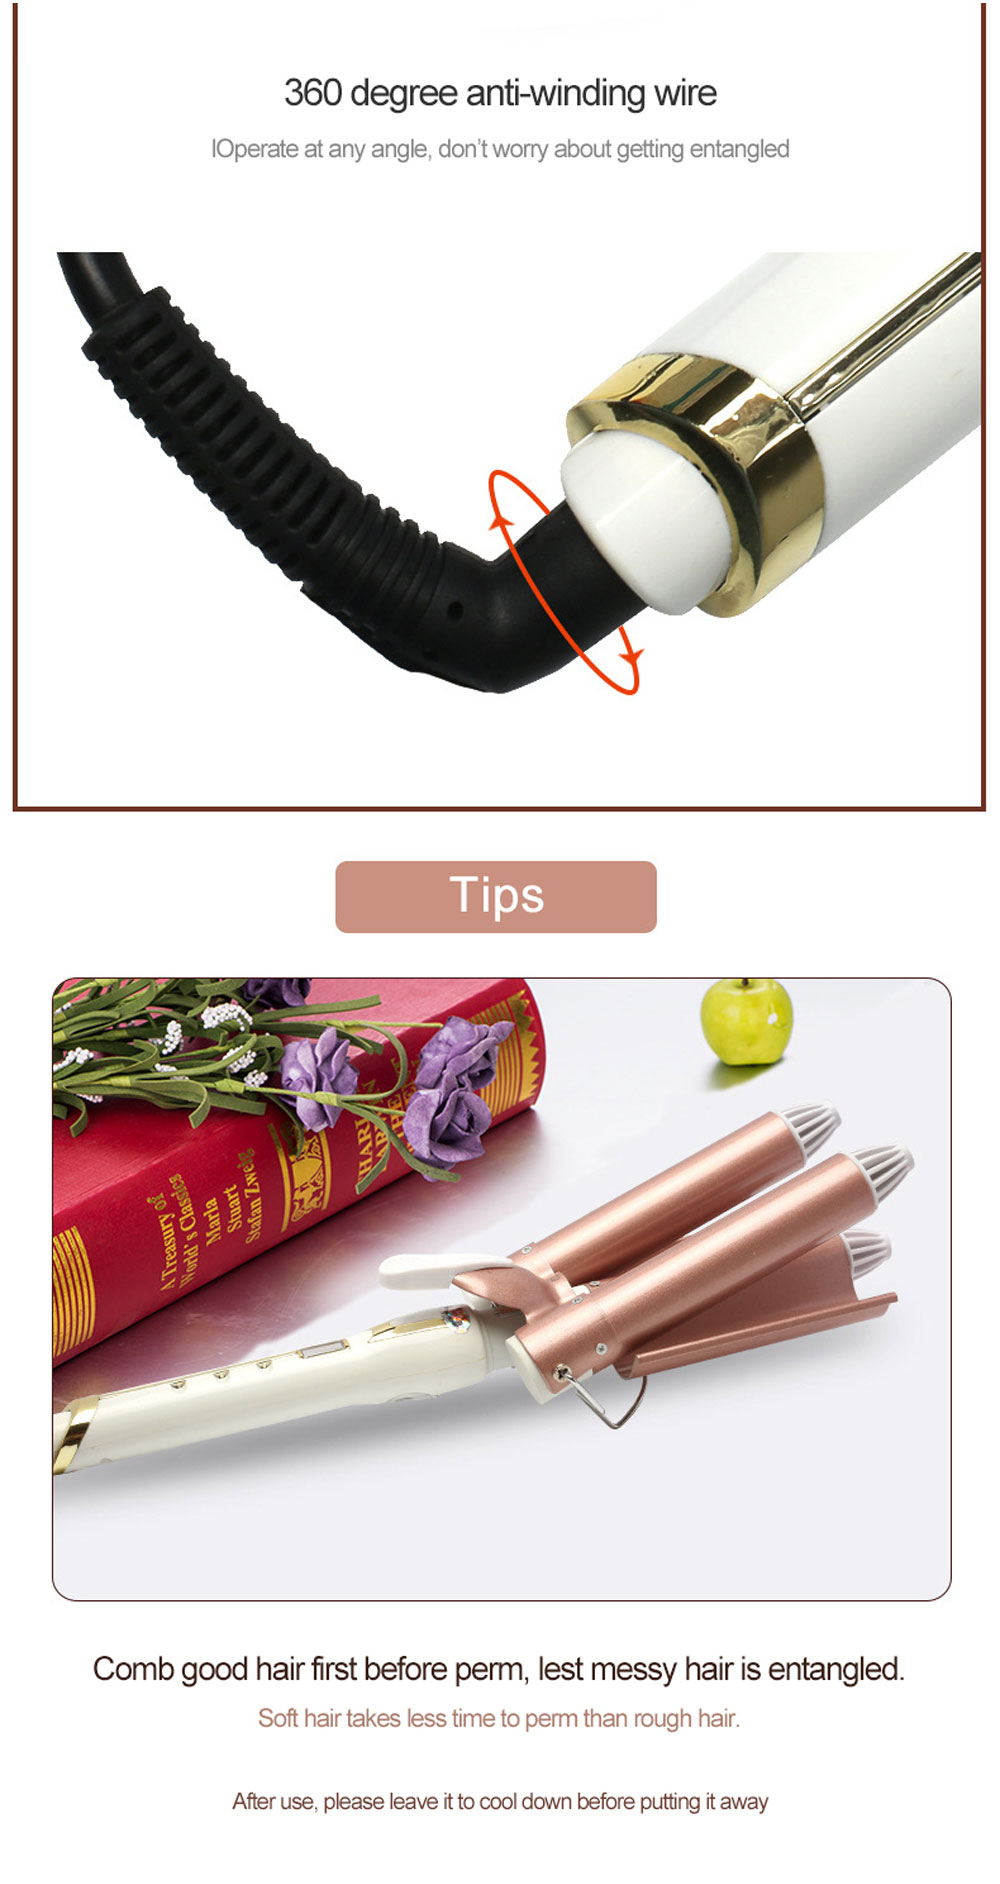 3 in 1 curling iron